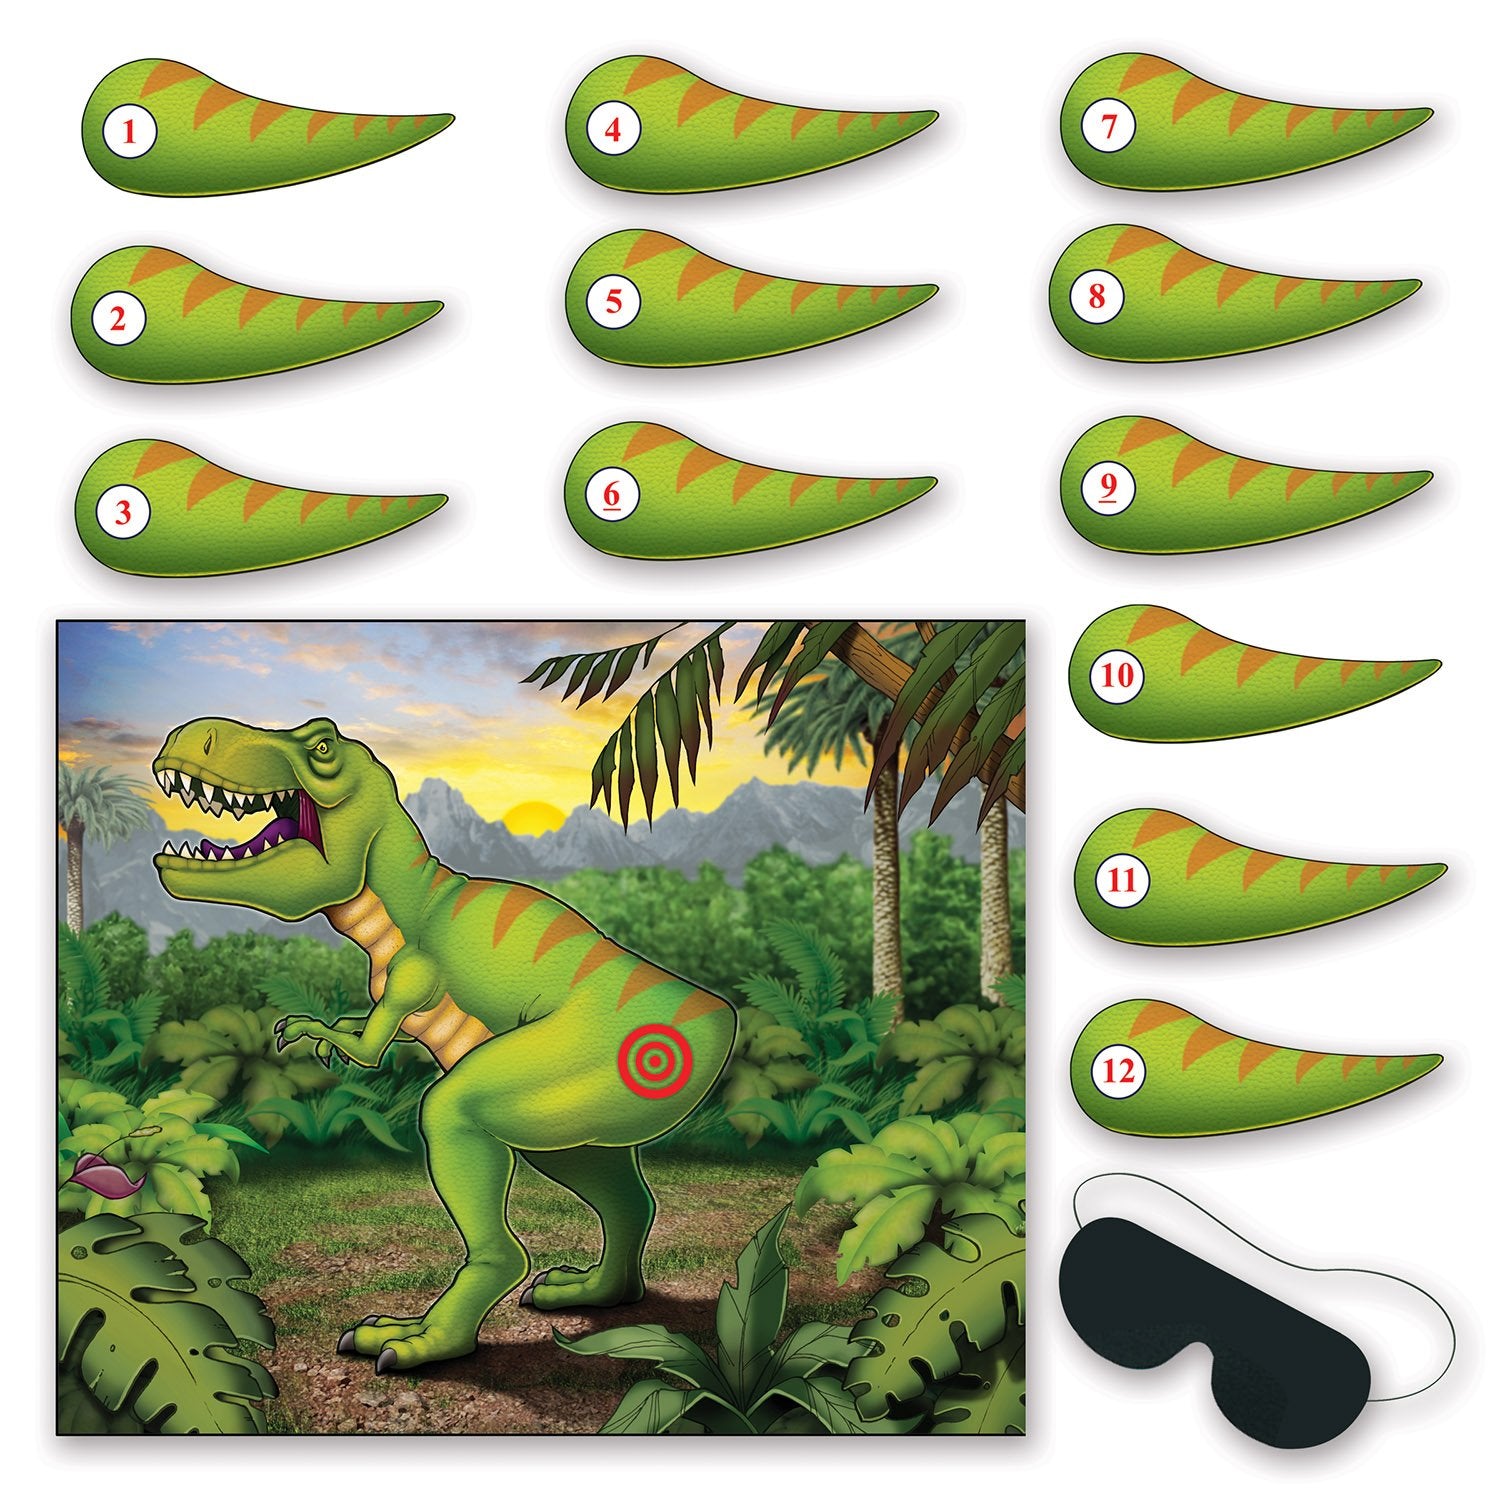 Beistle Pin The Tail On The Dinosaur Game, Multicolored